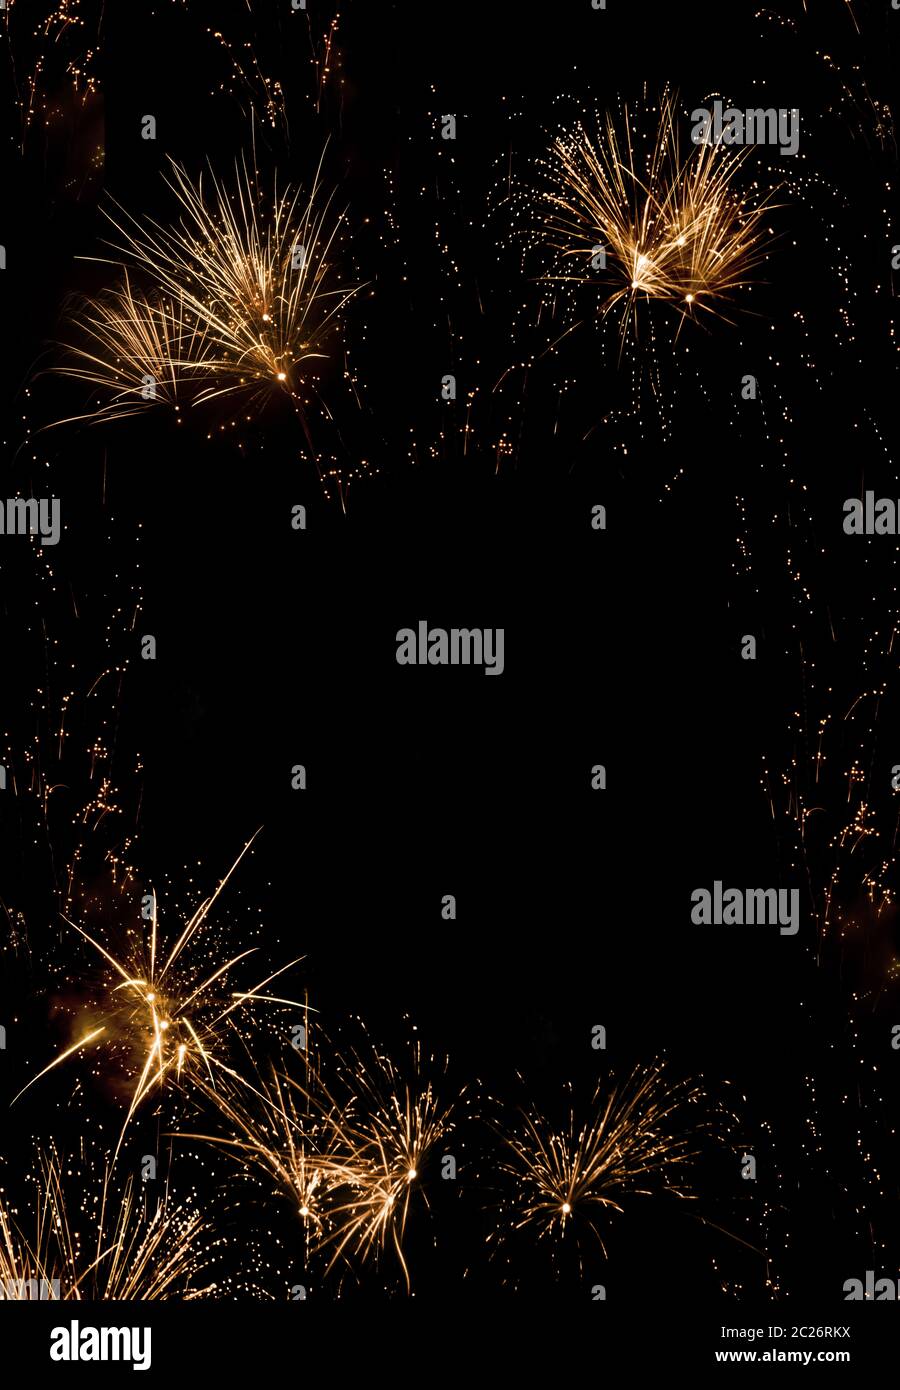 Vertical background with golden fireworks on night sky at the turn of the year Stock Photo